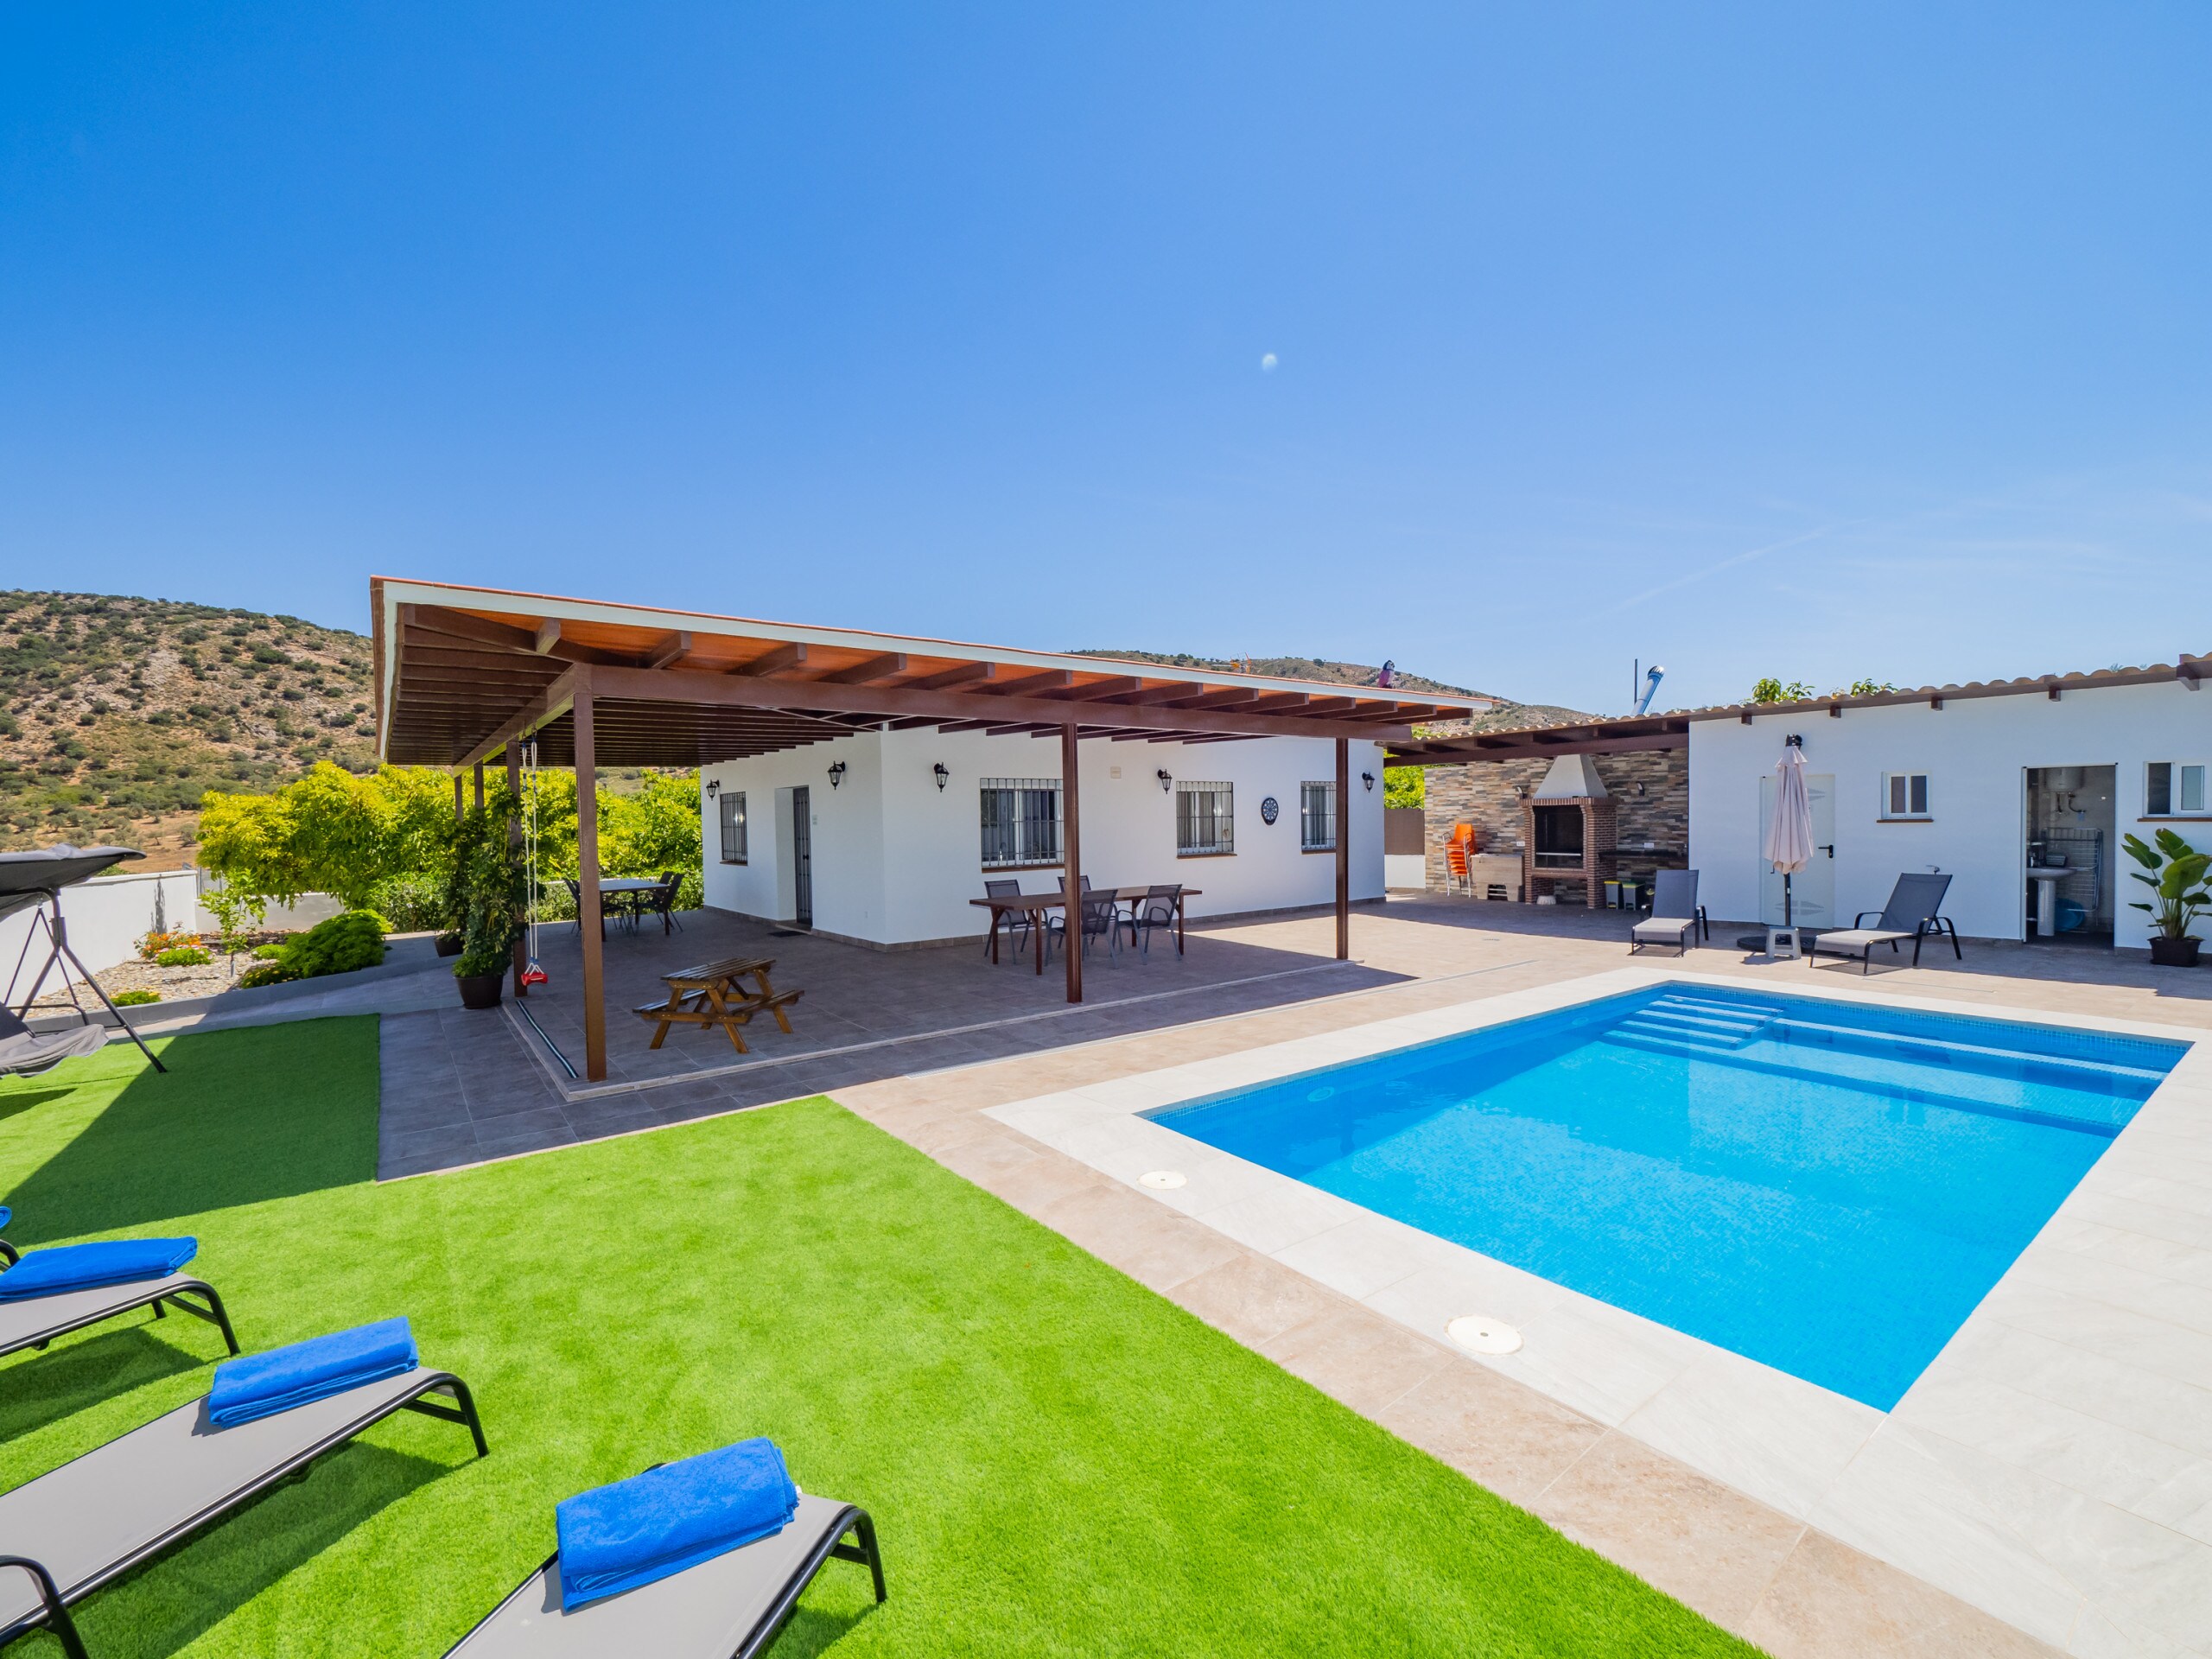 Rural family accommodation with private pool